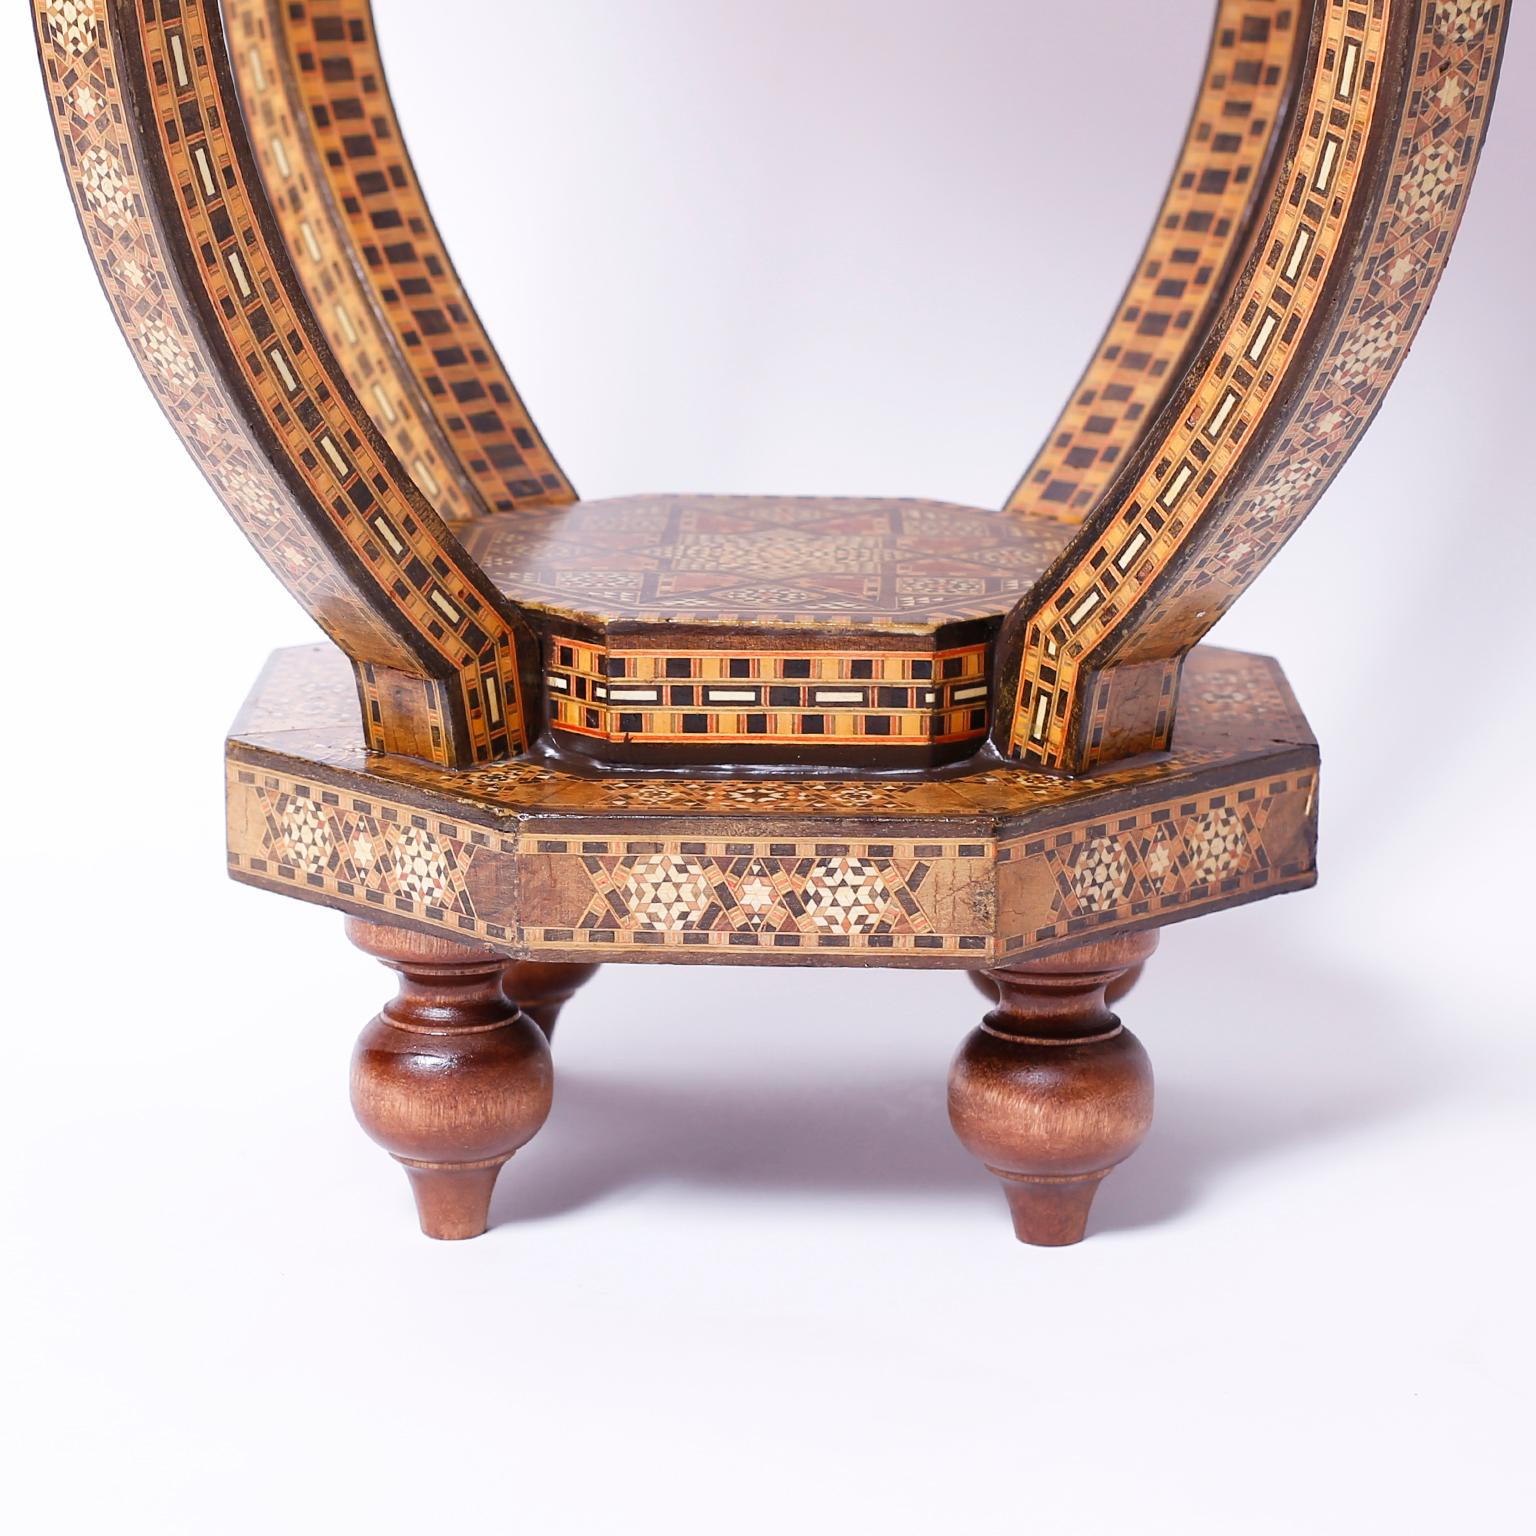 20th Century Pair of Syrian Inlaid Tables or Stands